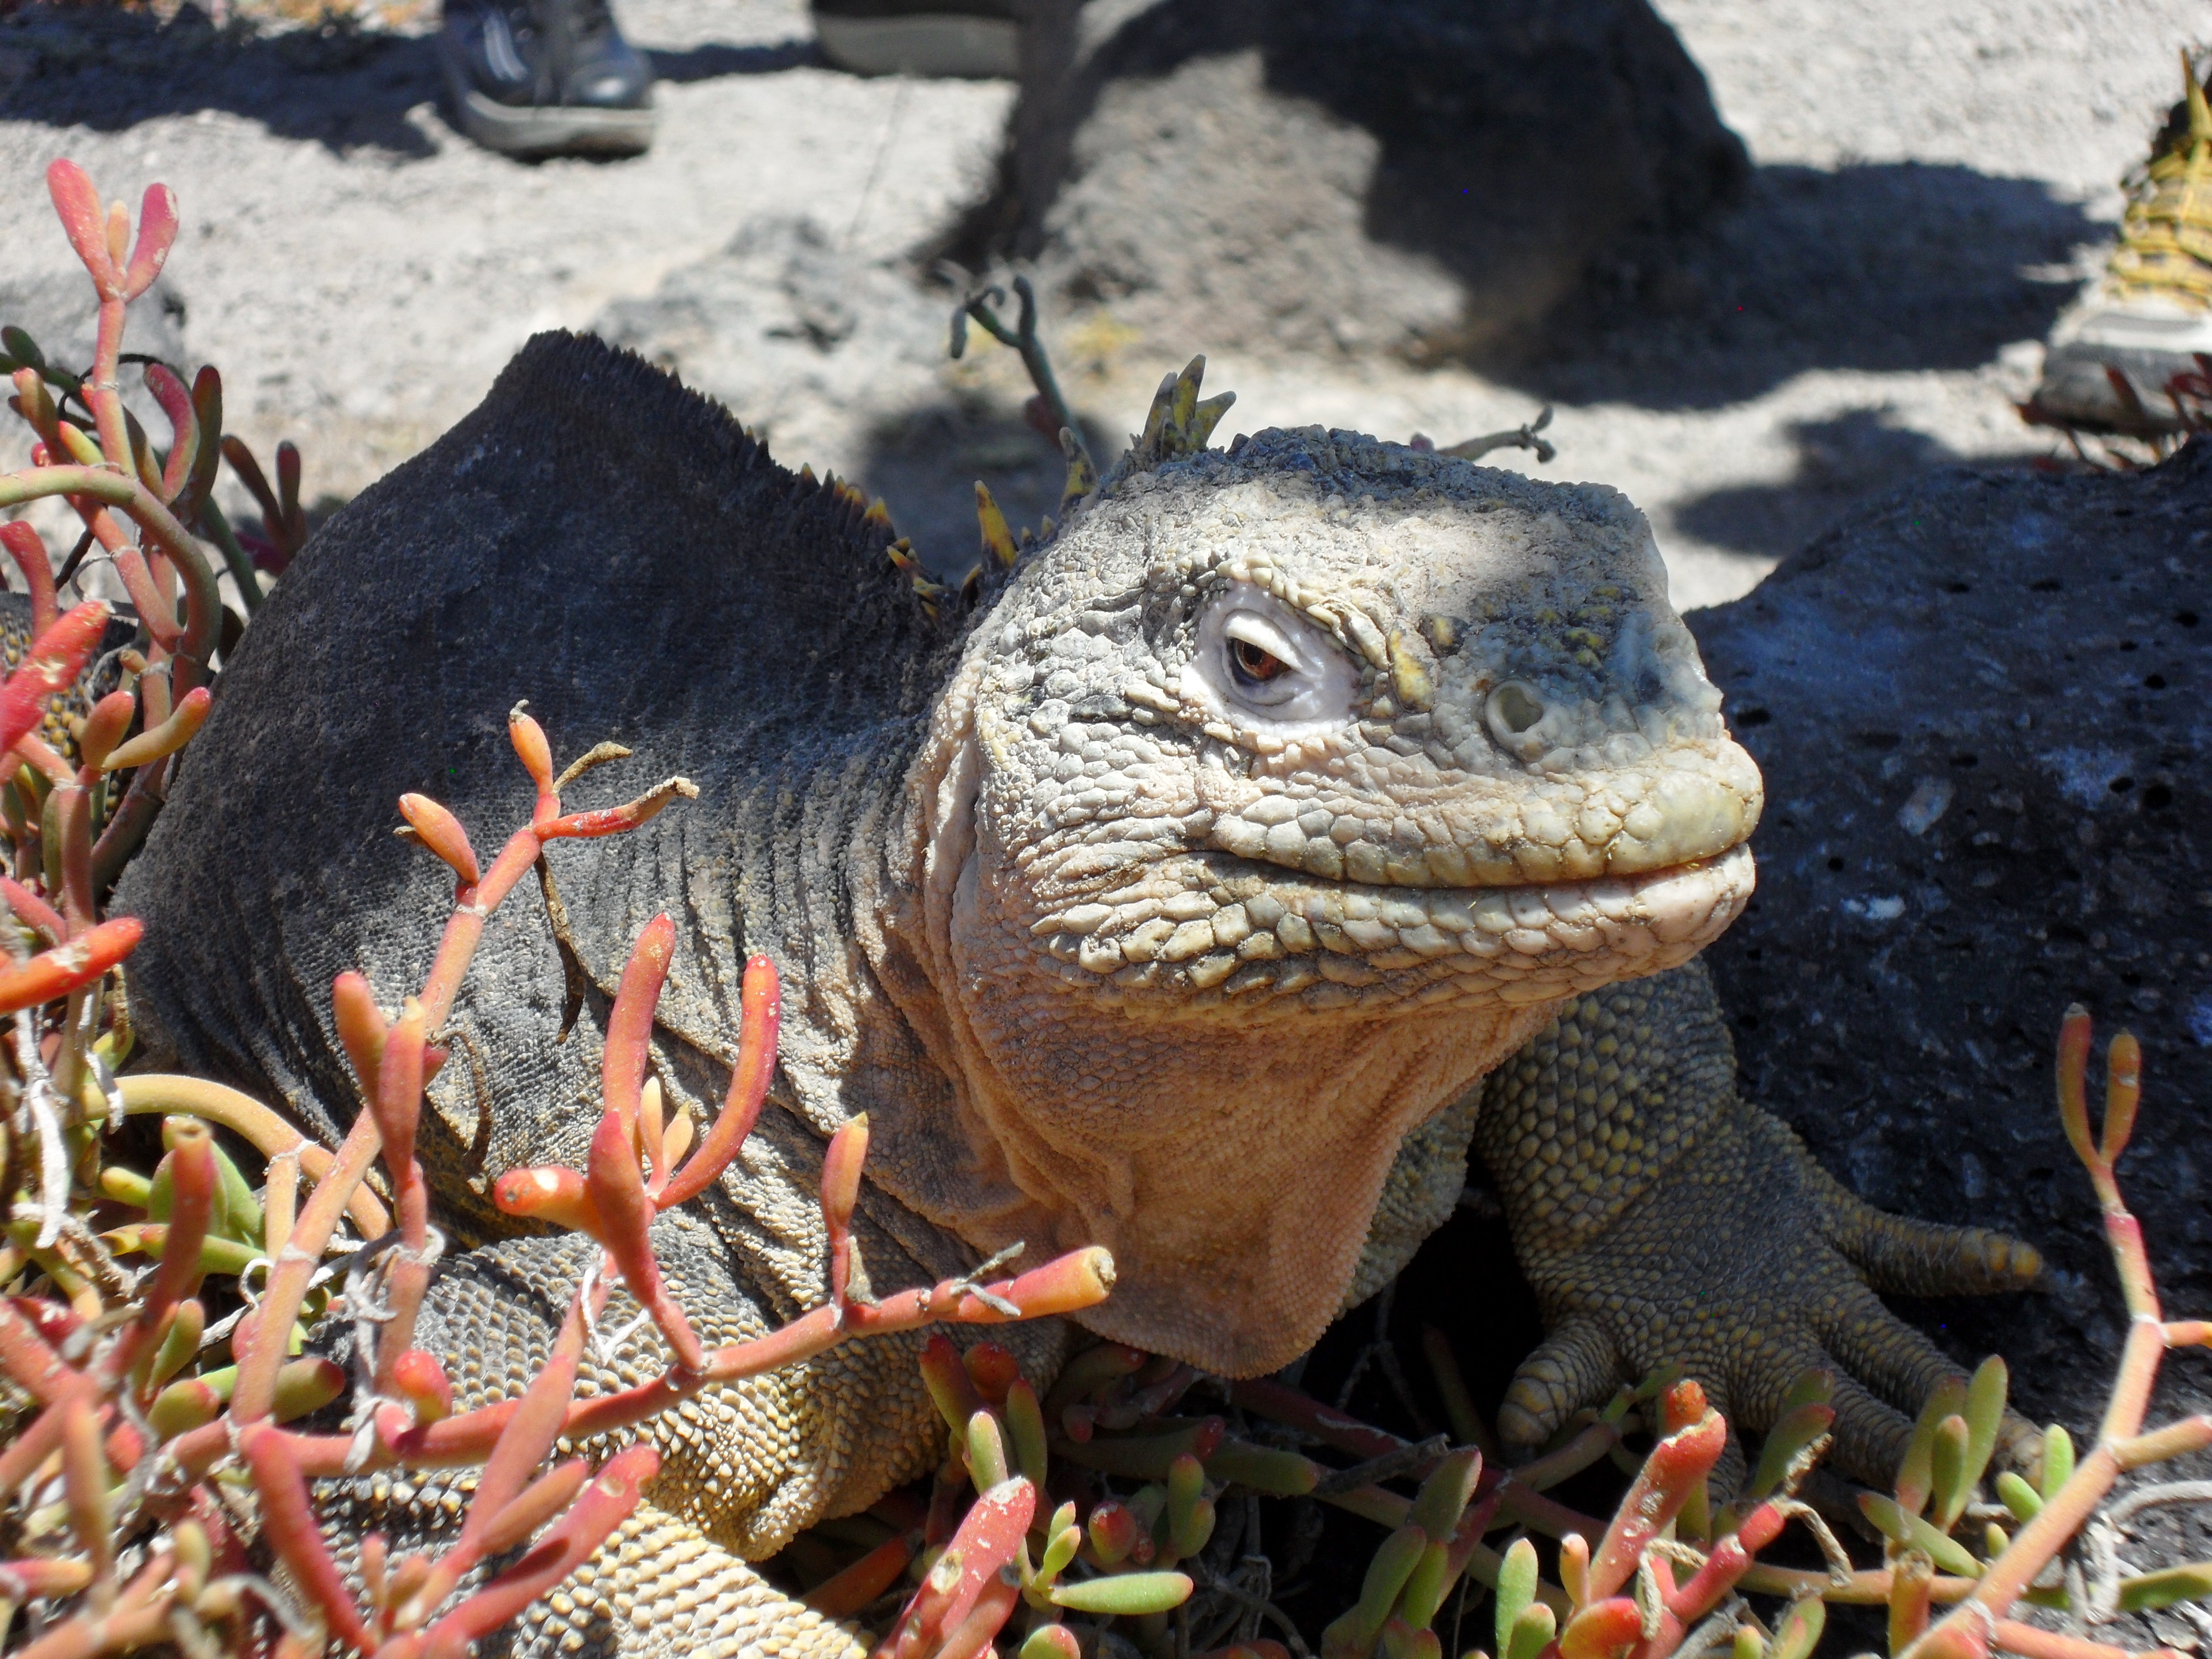 How to Visit the Galapagos on a Budget